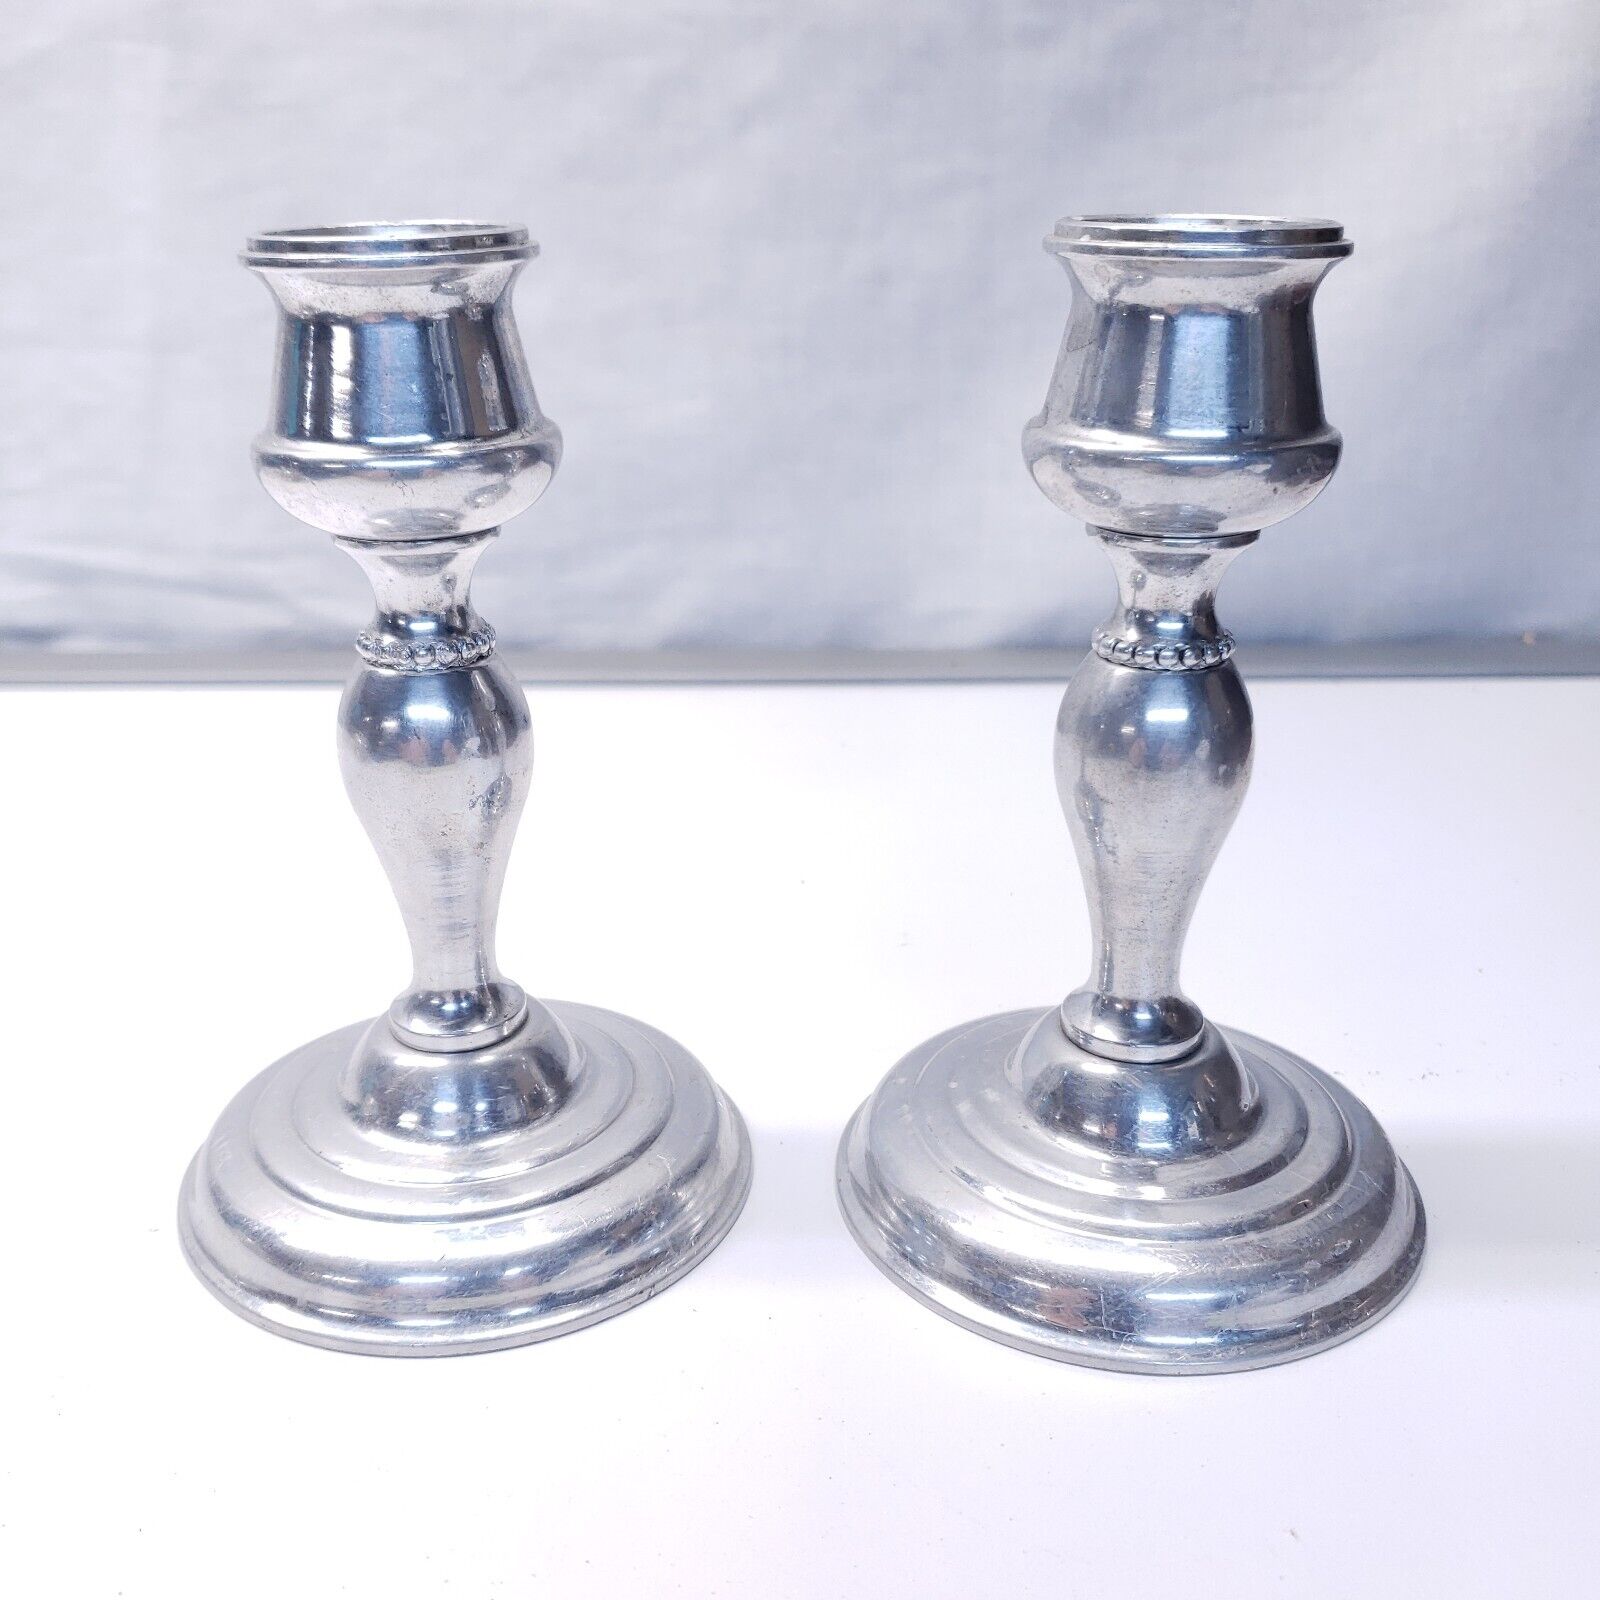 Vintage Pair of MCM Morgenware New York Aluminum Candle Stick Holders